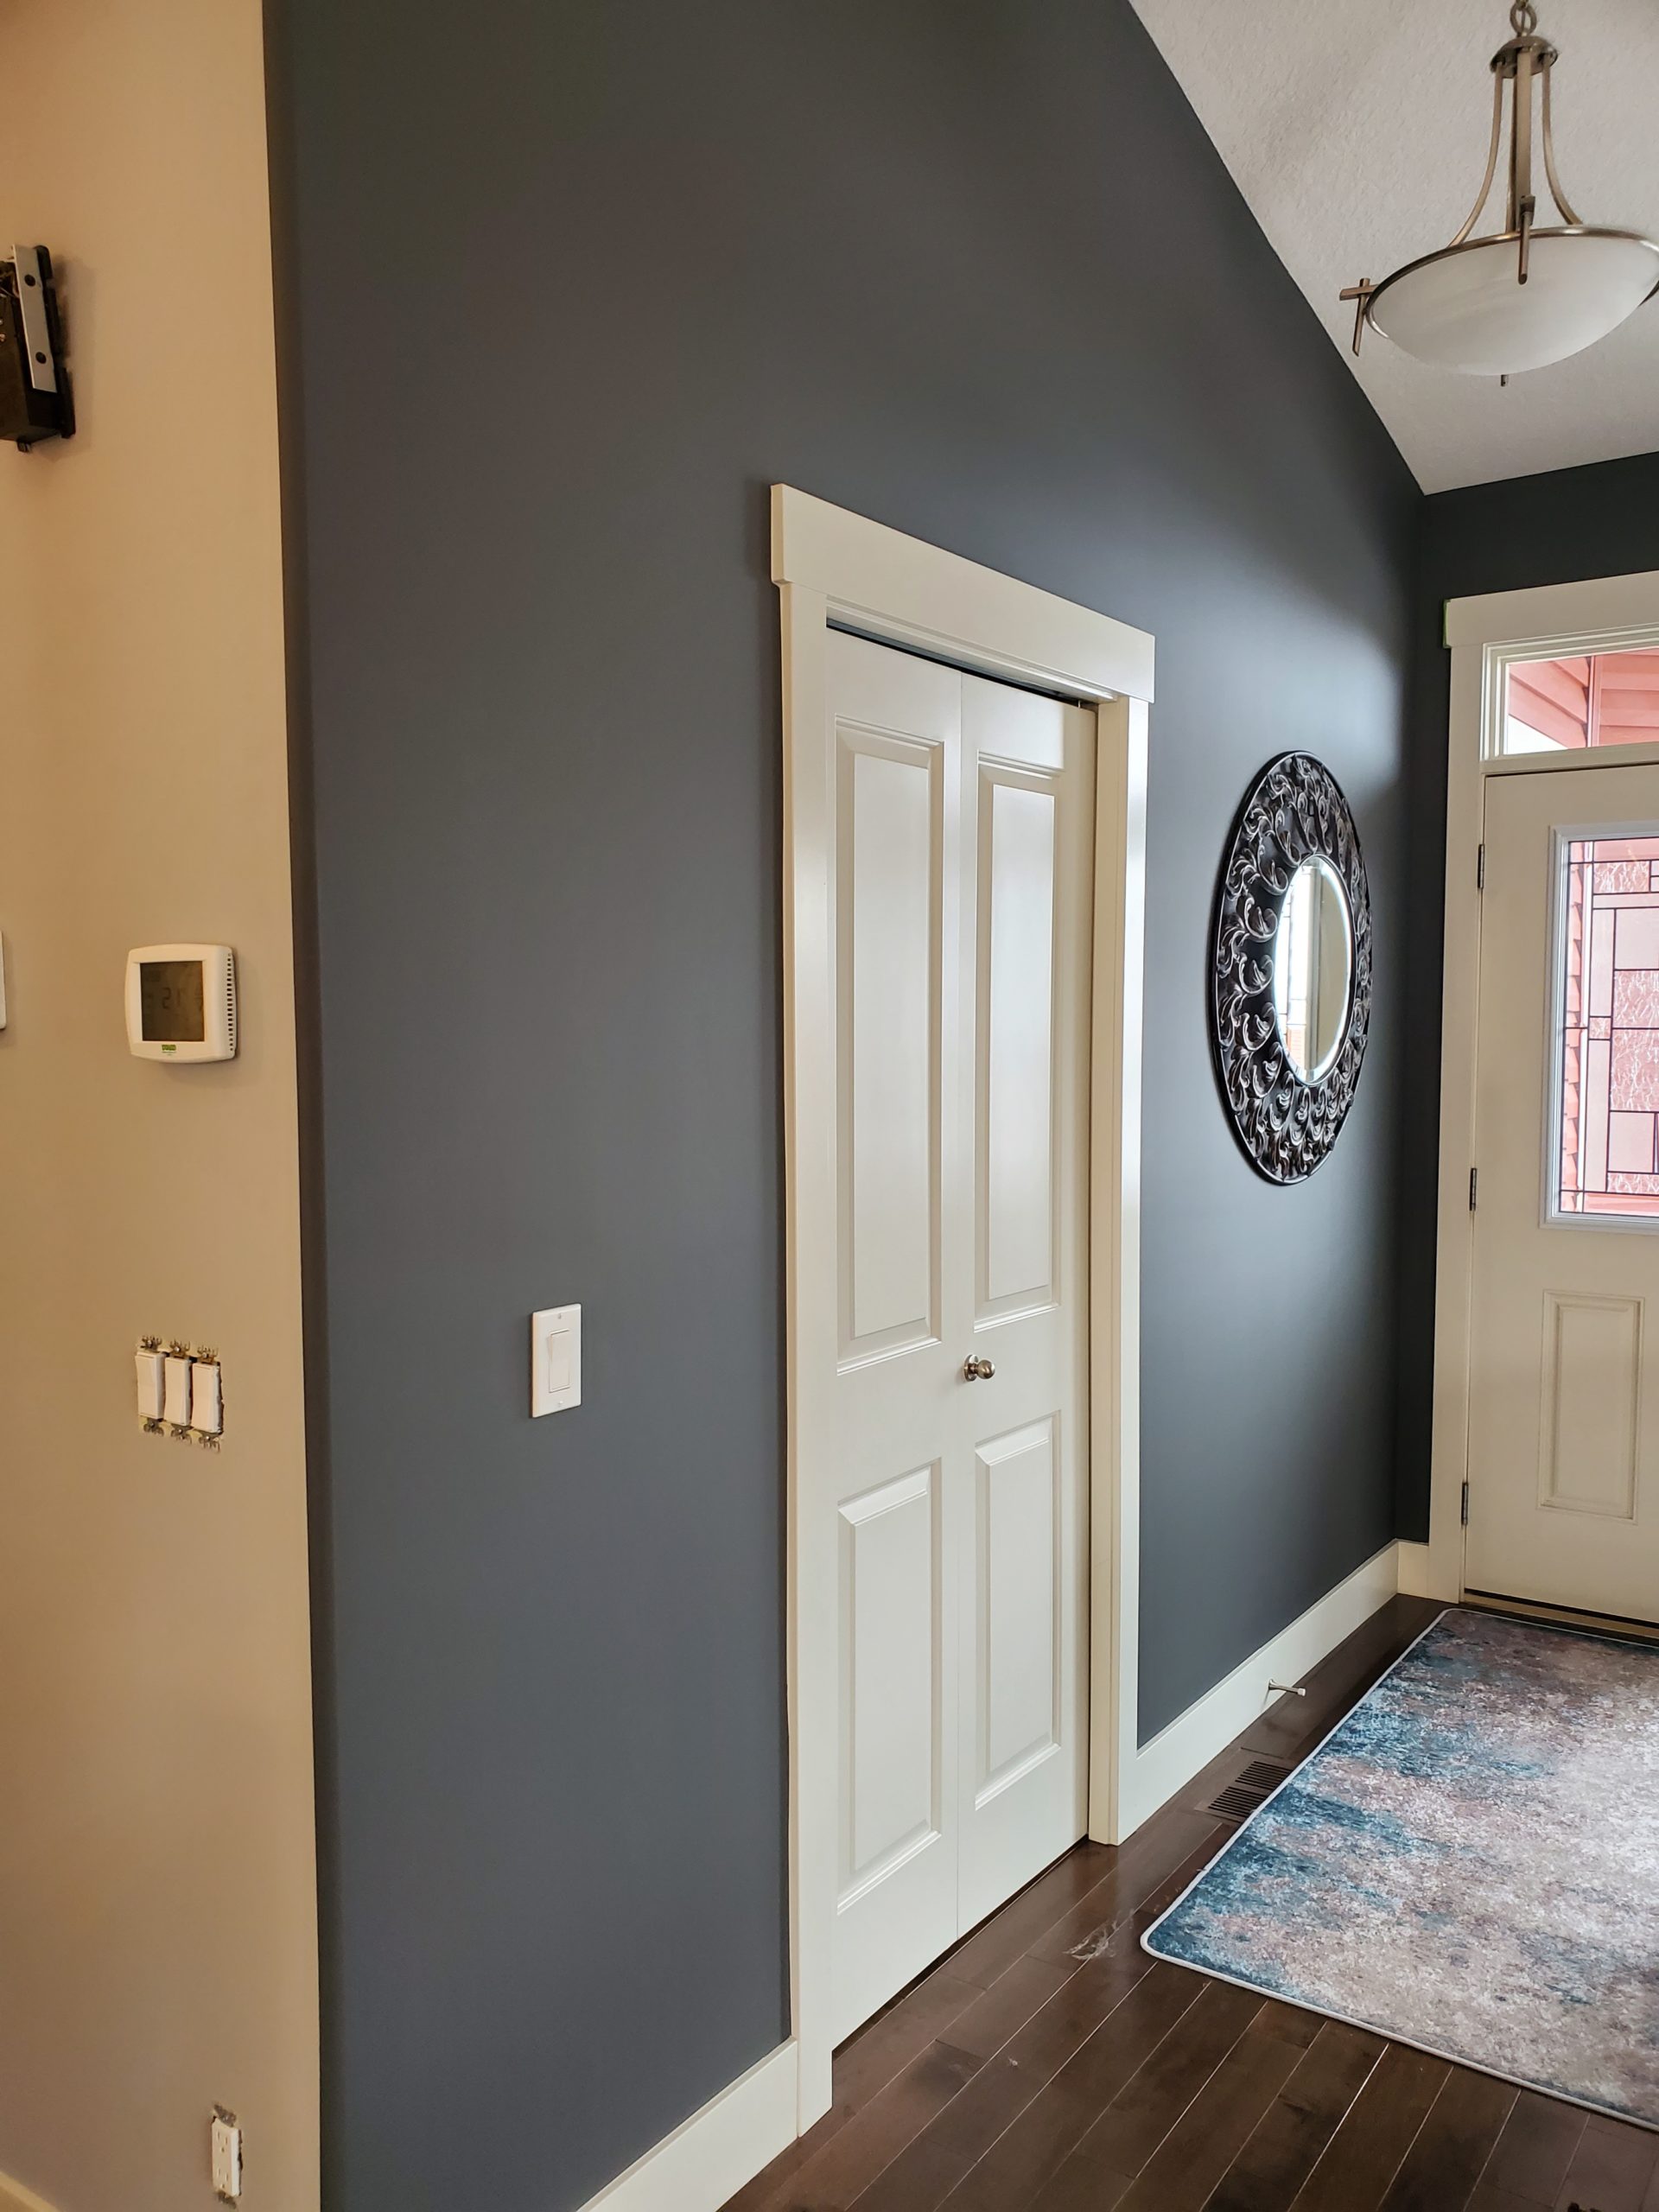 Residential Interior Painting Services in Edmonton | Wall Street Coatings